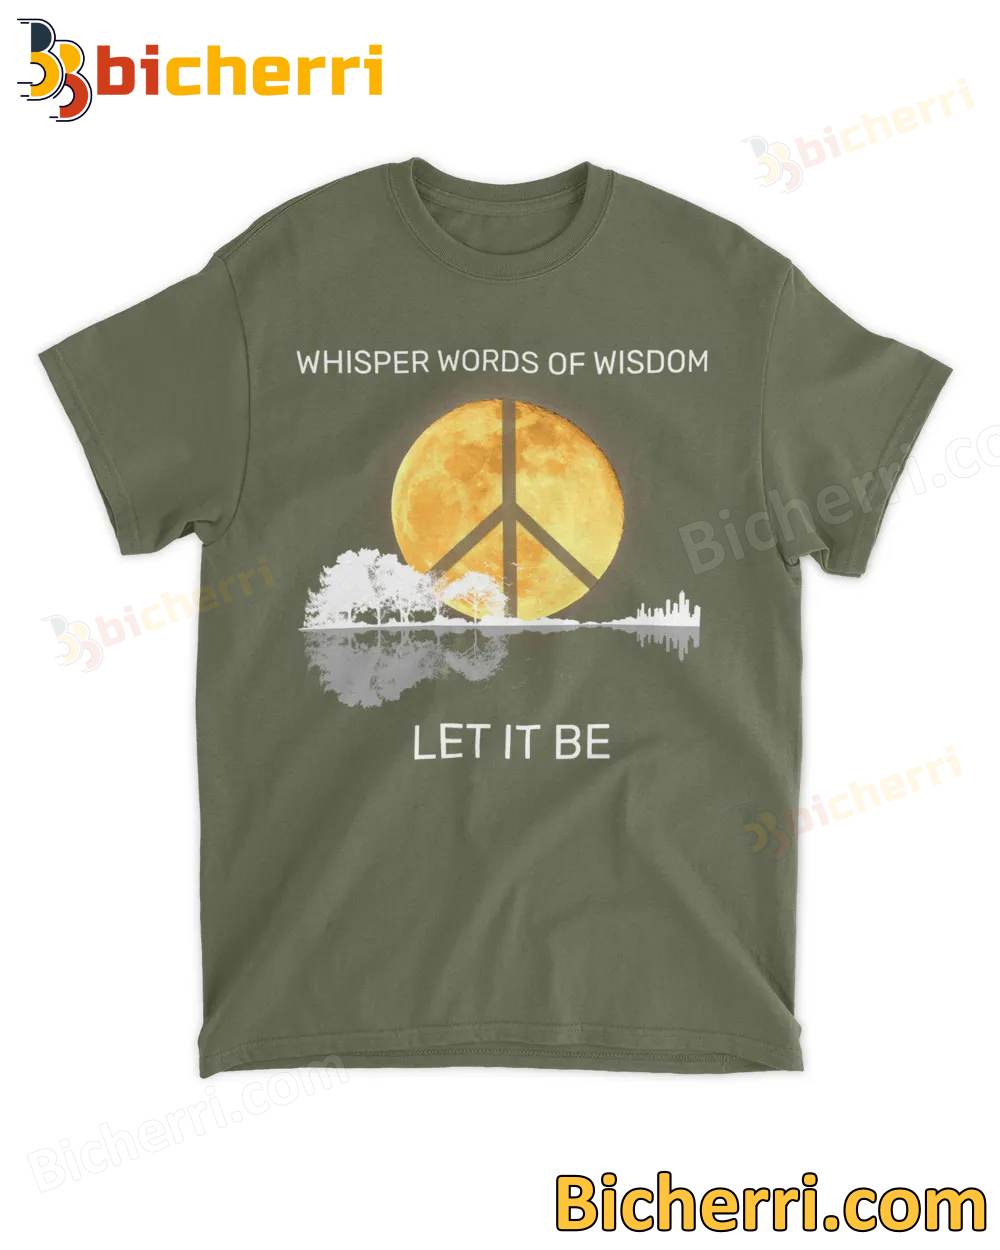 The Moon Whisper Words Of Wisdom Let It Be T-shirt